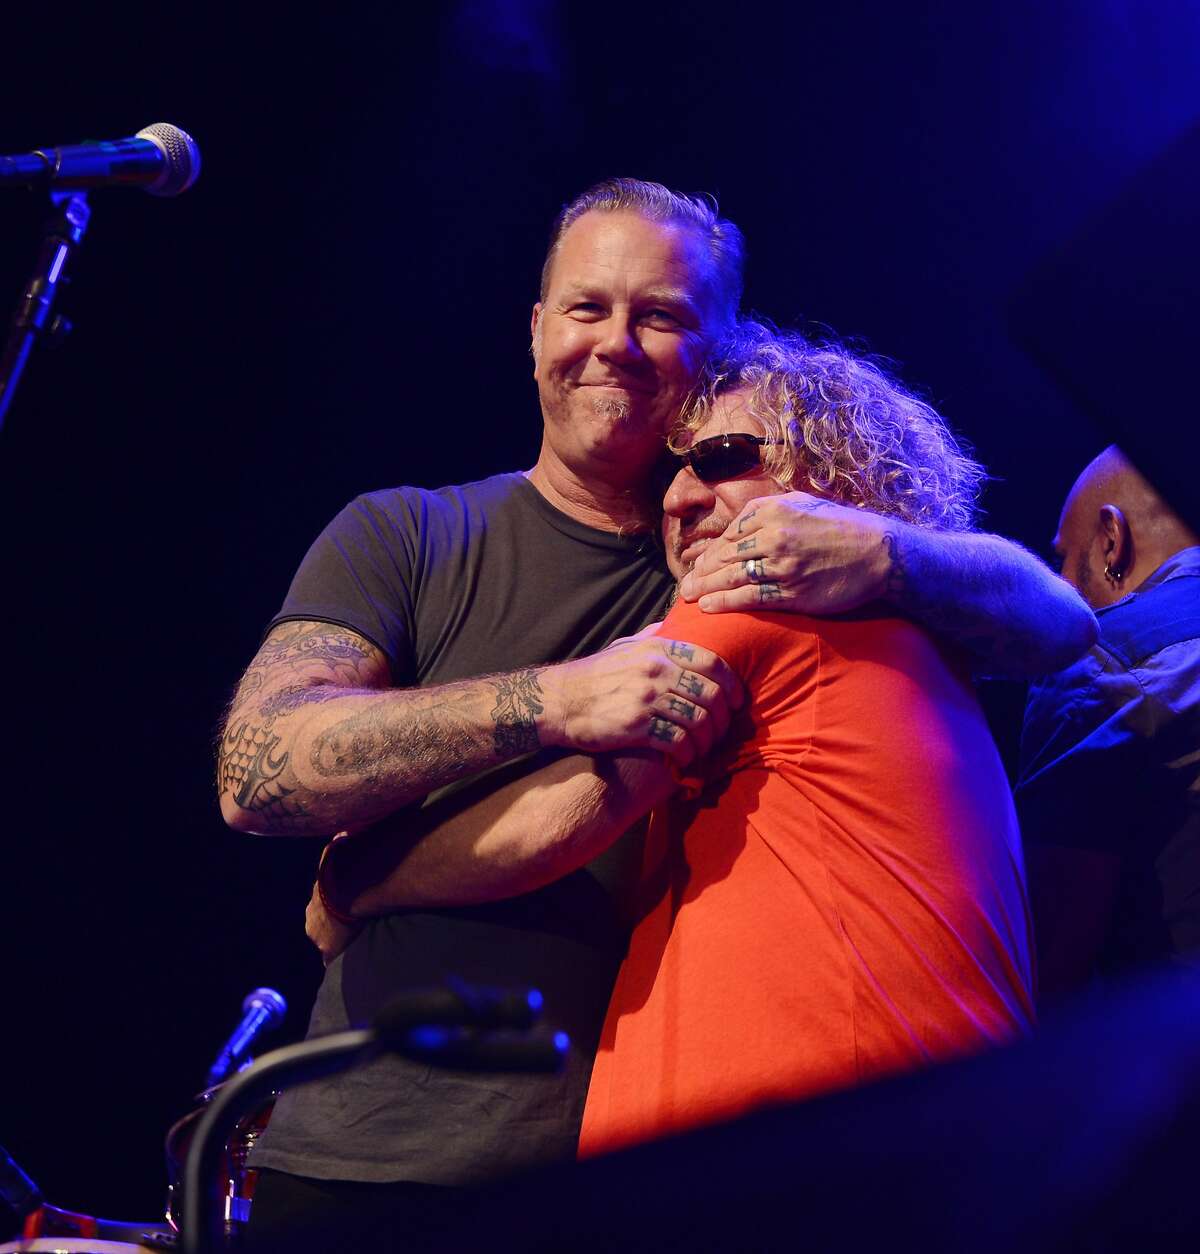 James Hetfield and Sammy Hagar embrace at Acoustic 4 A Cure at the Fillmore Theater on Thursday, May 15, 2014 in San Francisco, Calif.